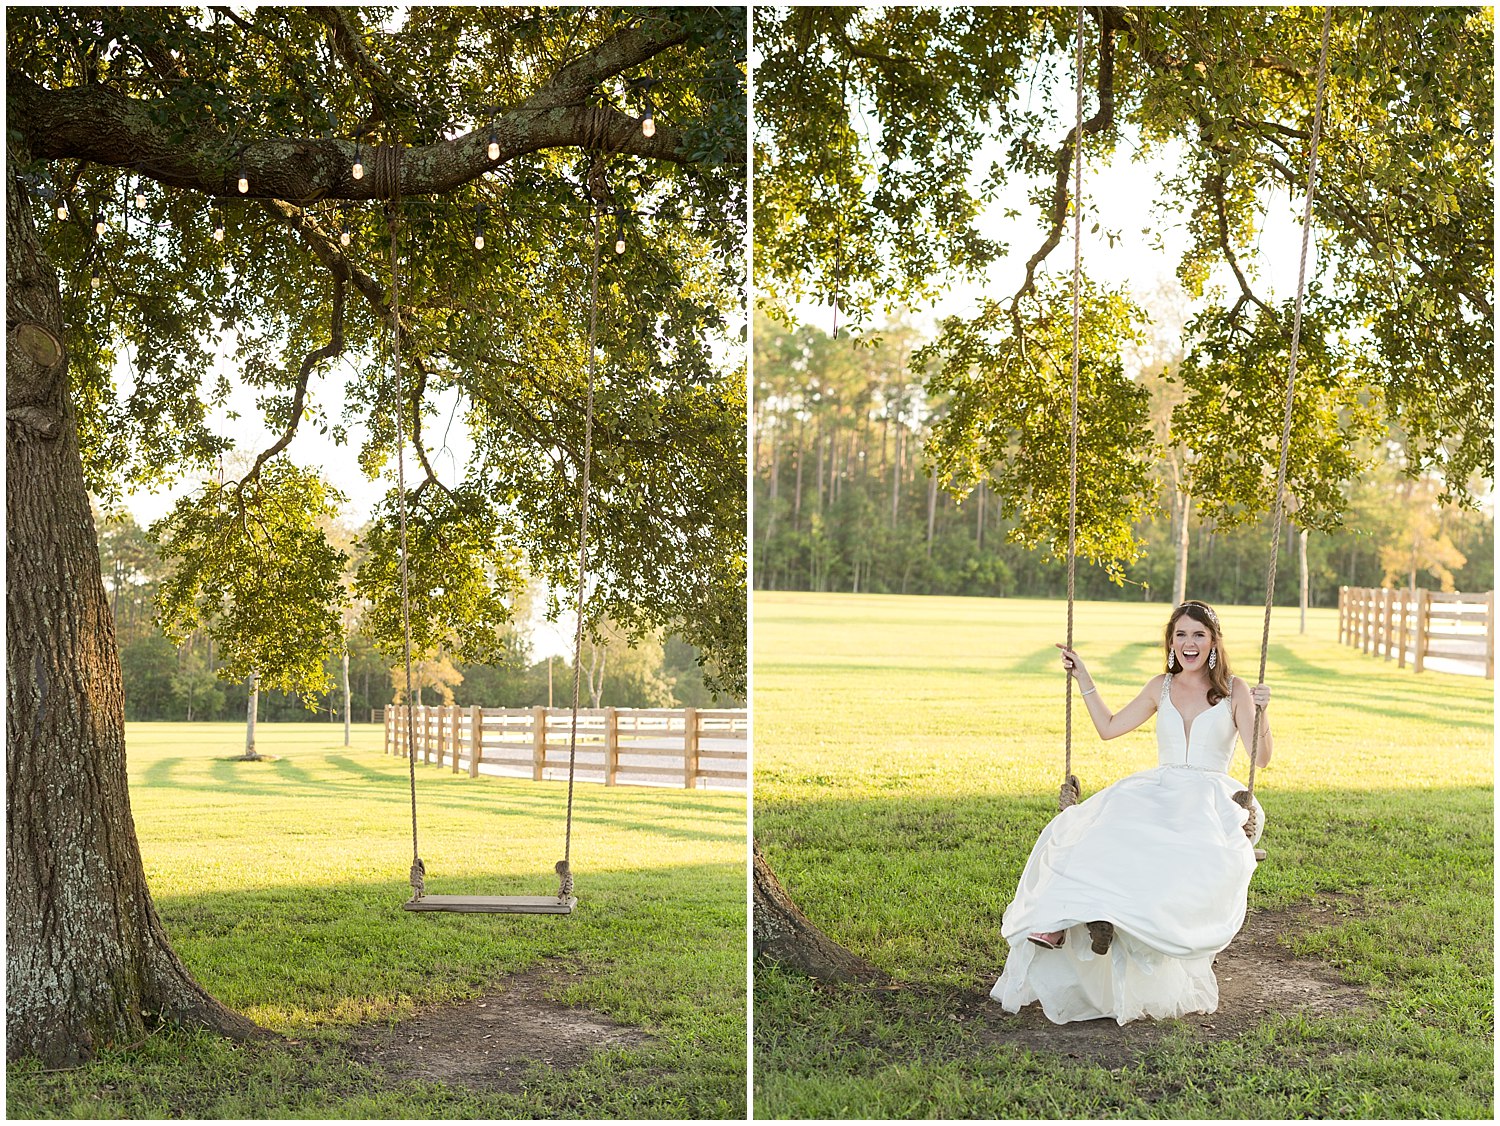 bridal portrait at The Barn at Love Farms - Ocean Springs, MS wedding photographer